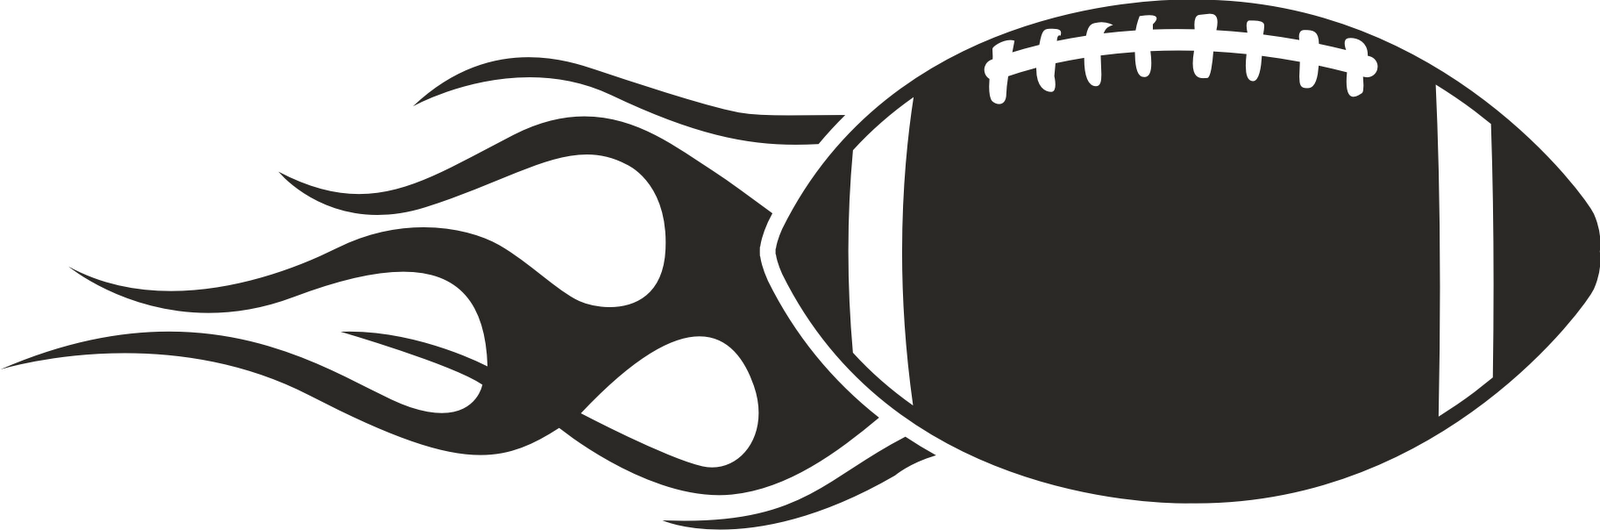 free clip art football pictures - photo #32